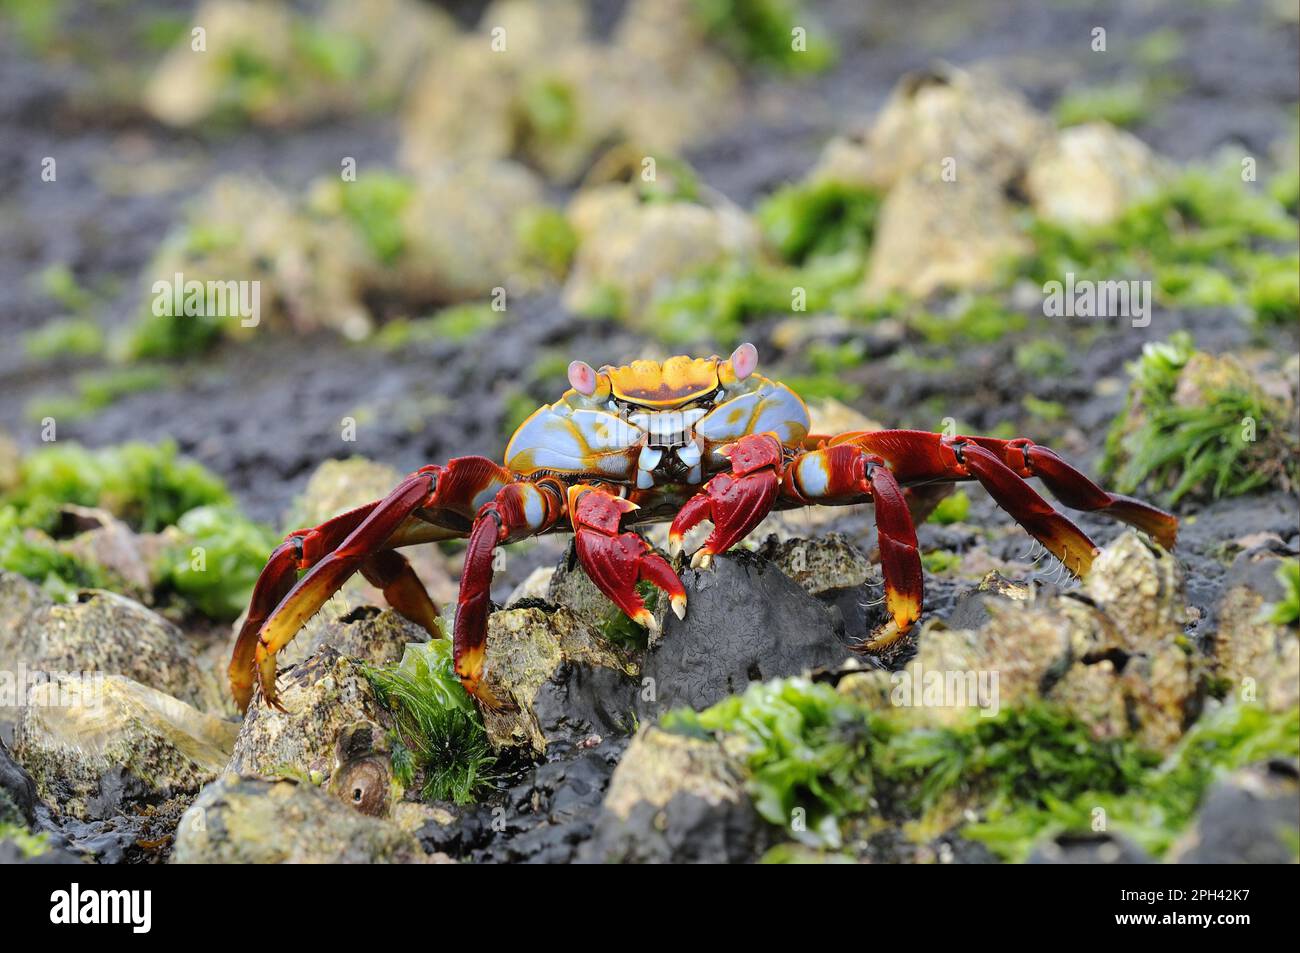 Red rock crabs, Red rock crabs, Other animals, Crabs, Crustaceans, Animals, Sally Lightfoot Crab (Grapsus grapsus) adult, standing on rocks with Stock Photo